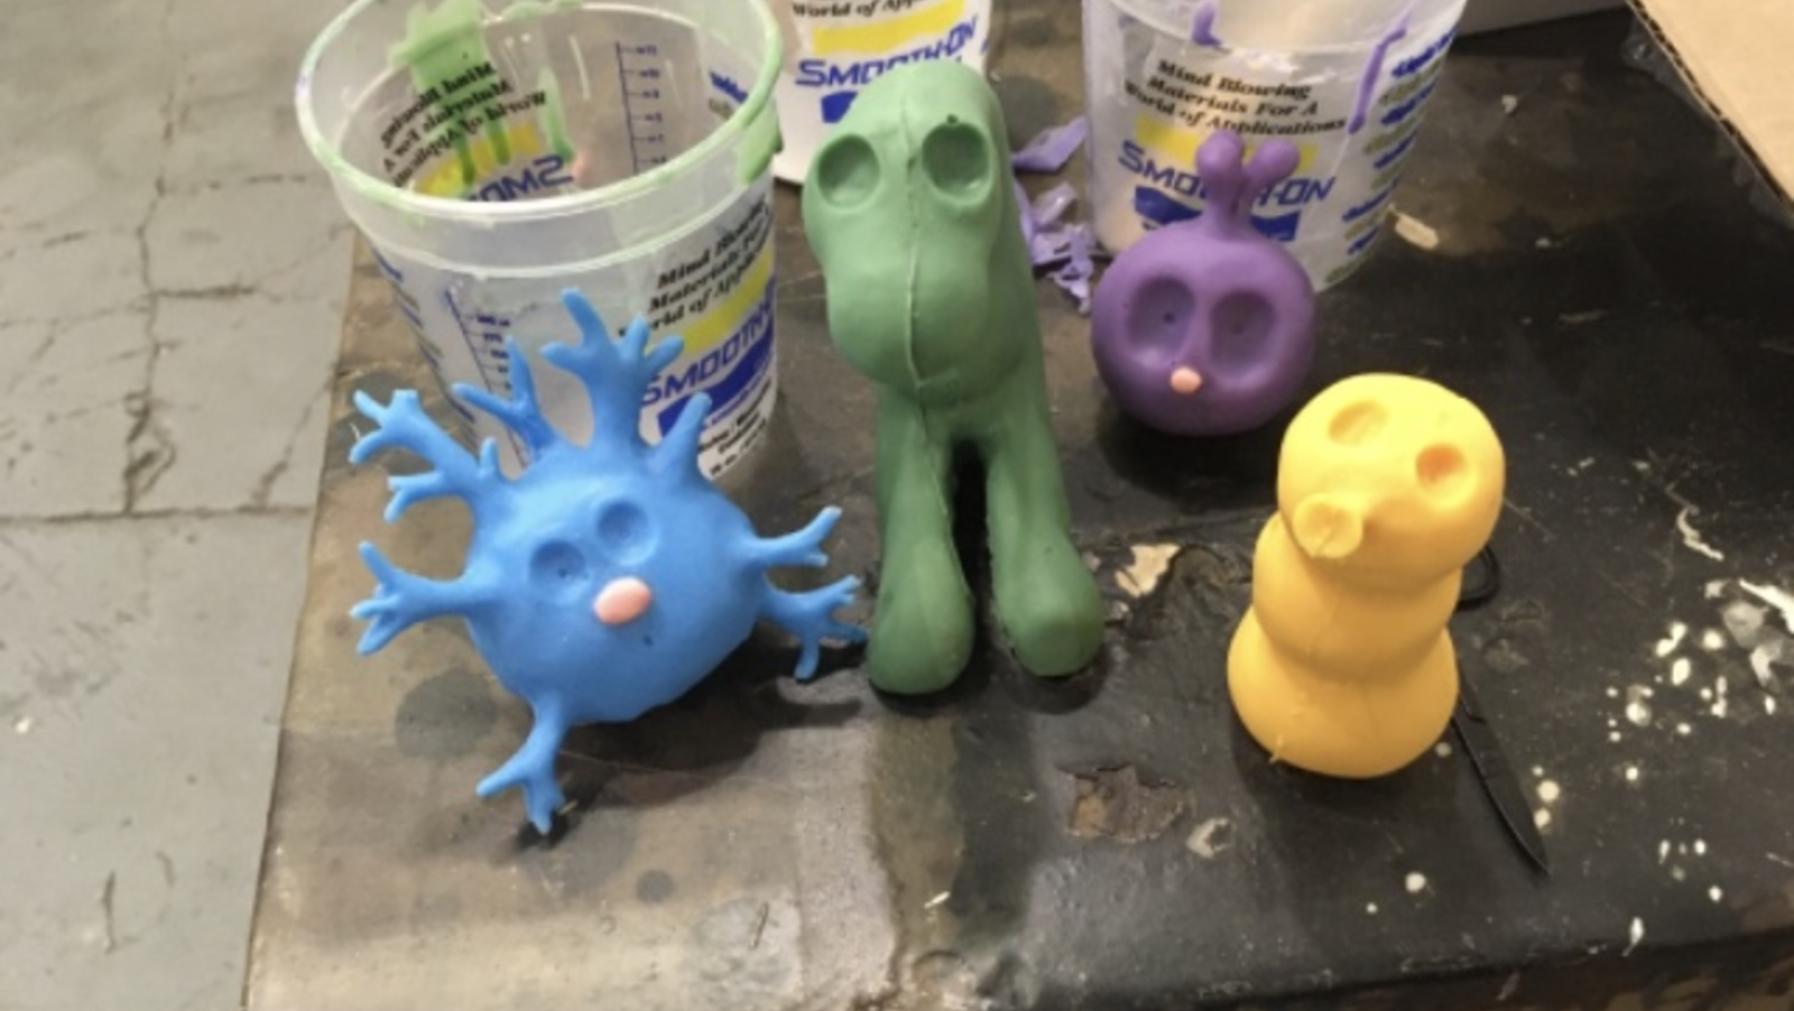 Blue, green, purple, and yellow clay figures in various stages of progress stand on the corner of a work table